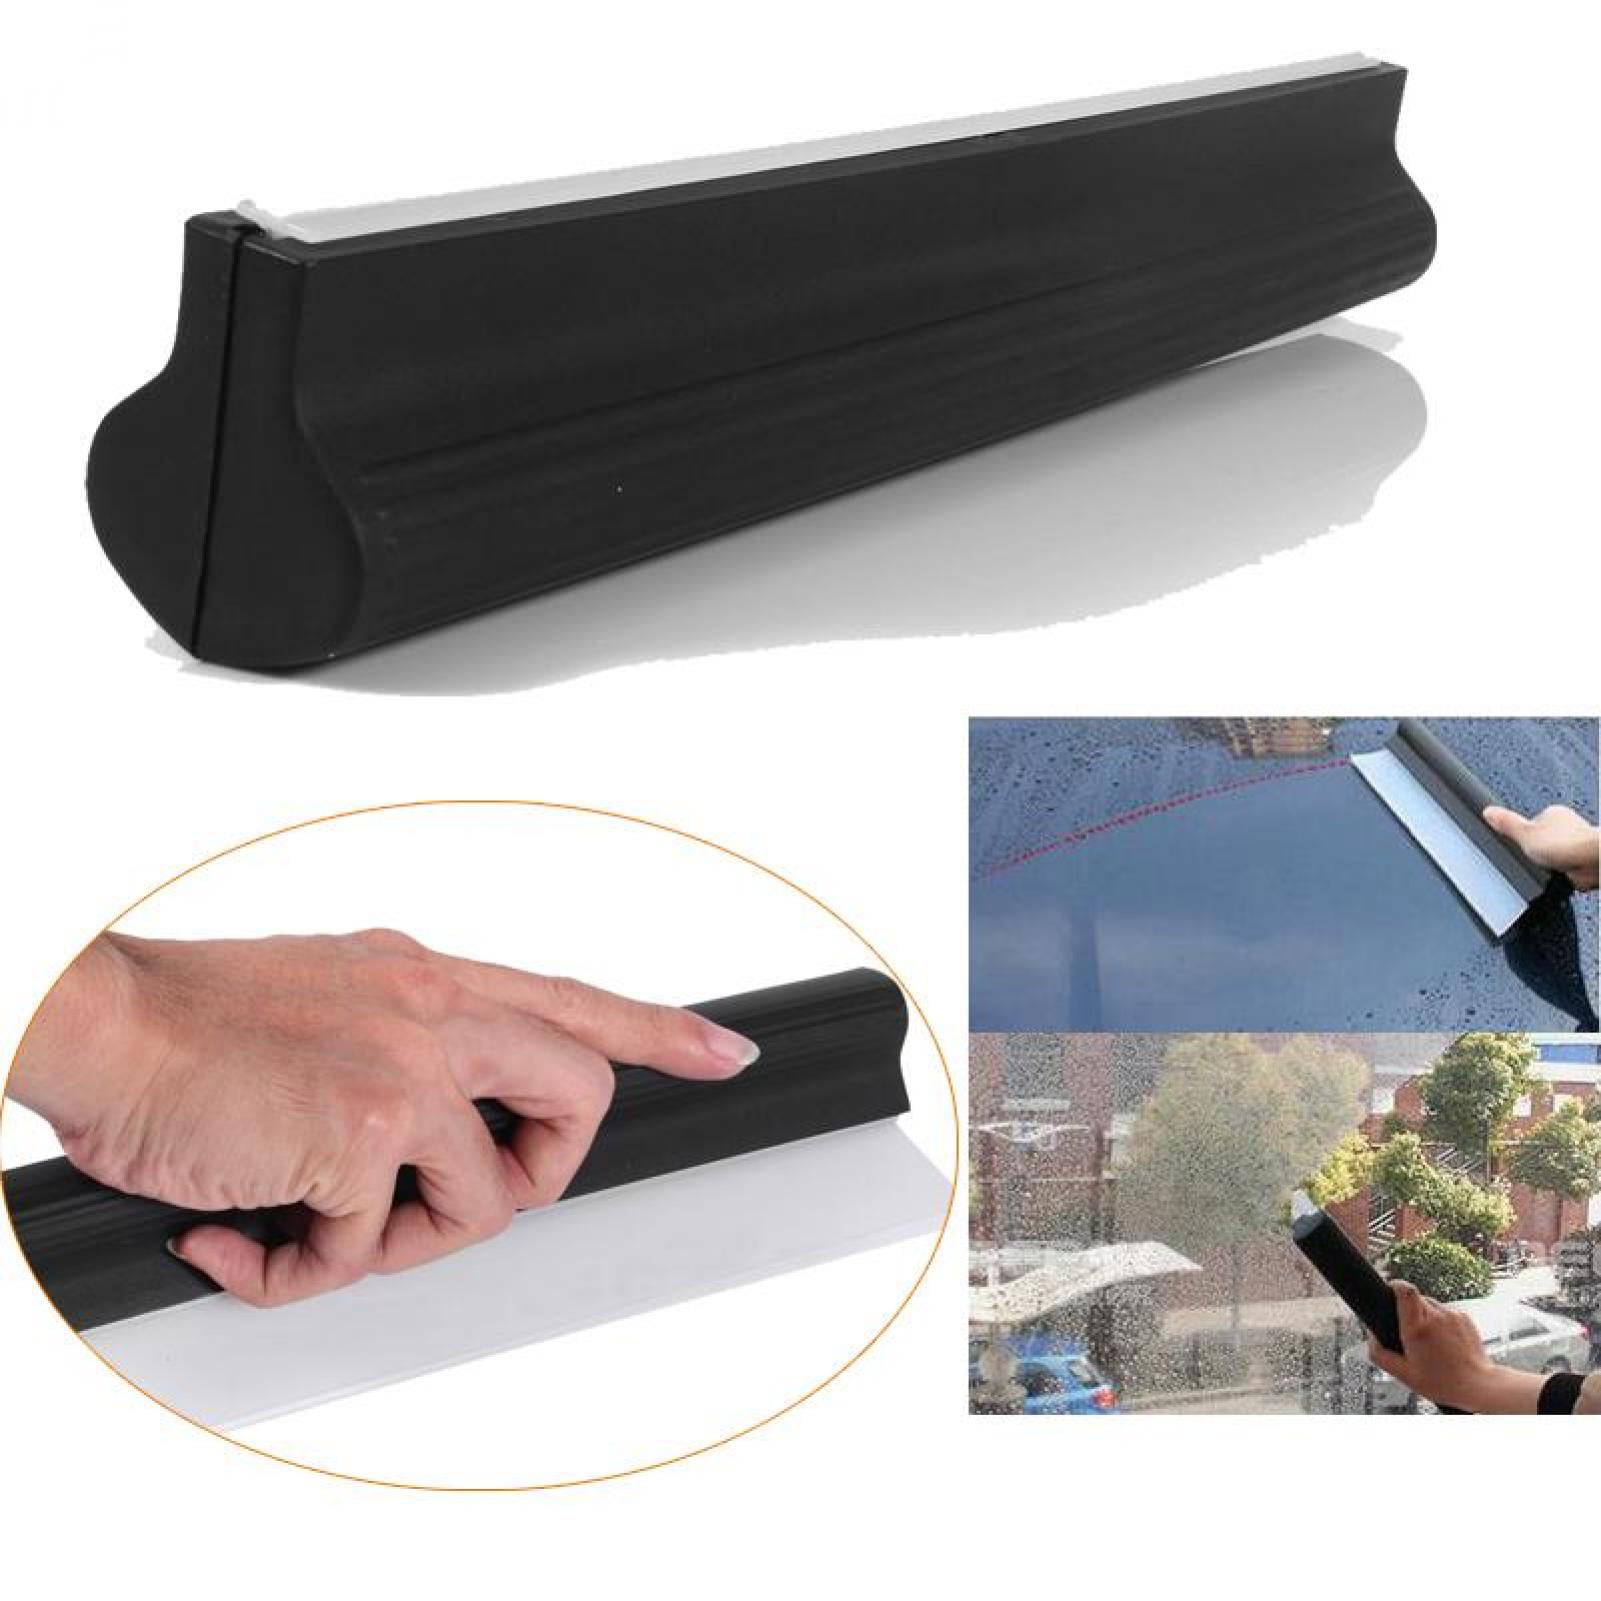 Windshields and Mirrors Outbit Silicone Wiper Antislip Squeegee Car Wiper Silicone Cleaner Water Clean Drying Window for Car Wndows